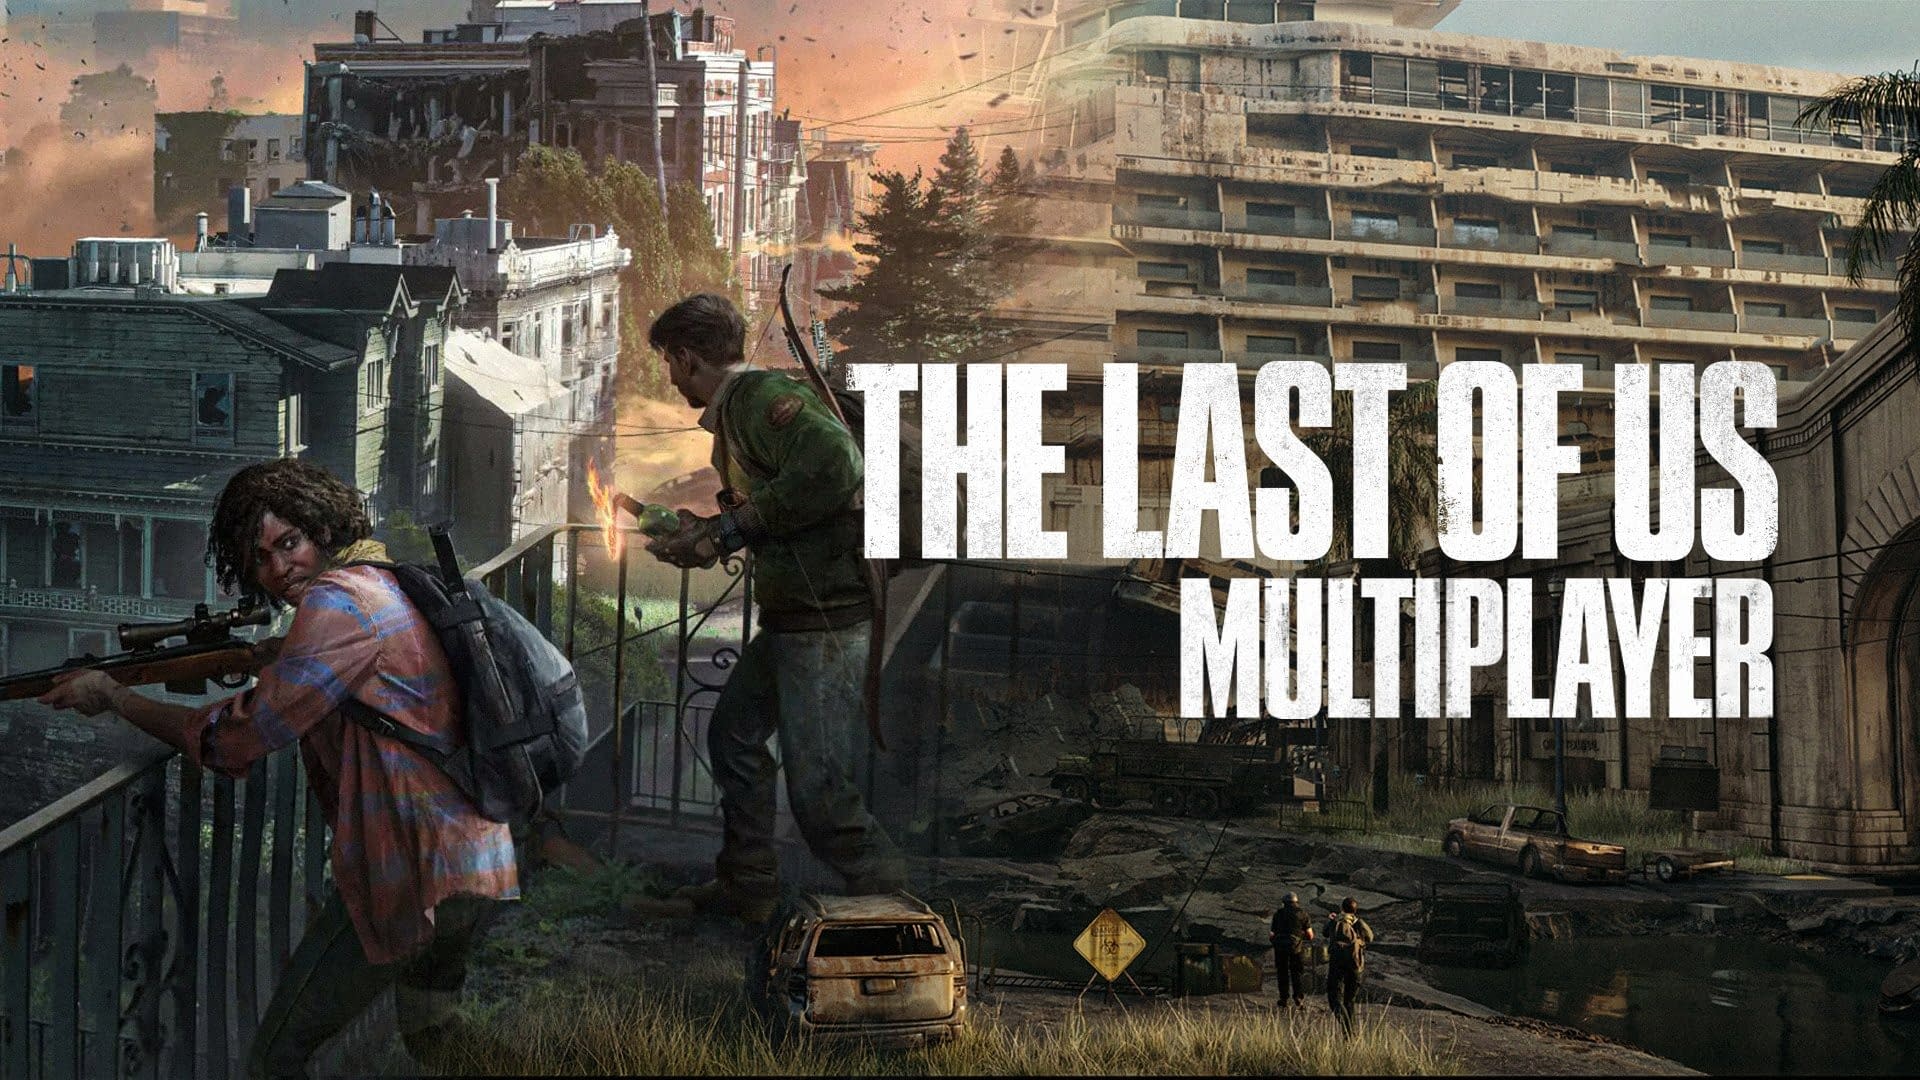 News from Naughty Dog team: The Last of Us Multiplayer was postponed!